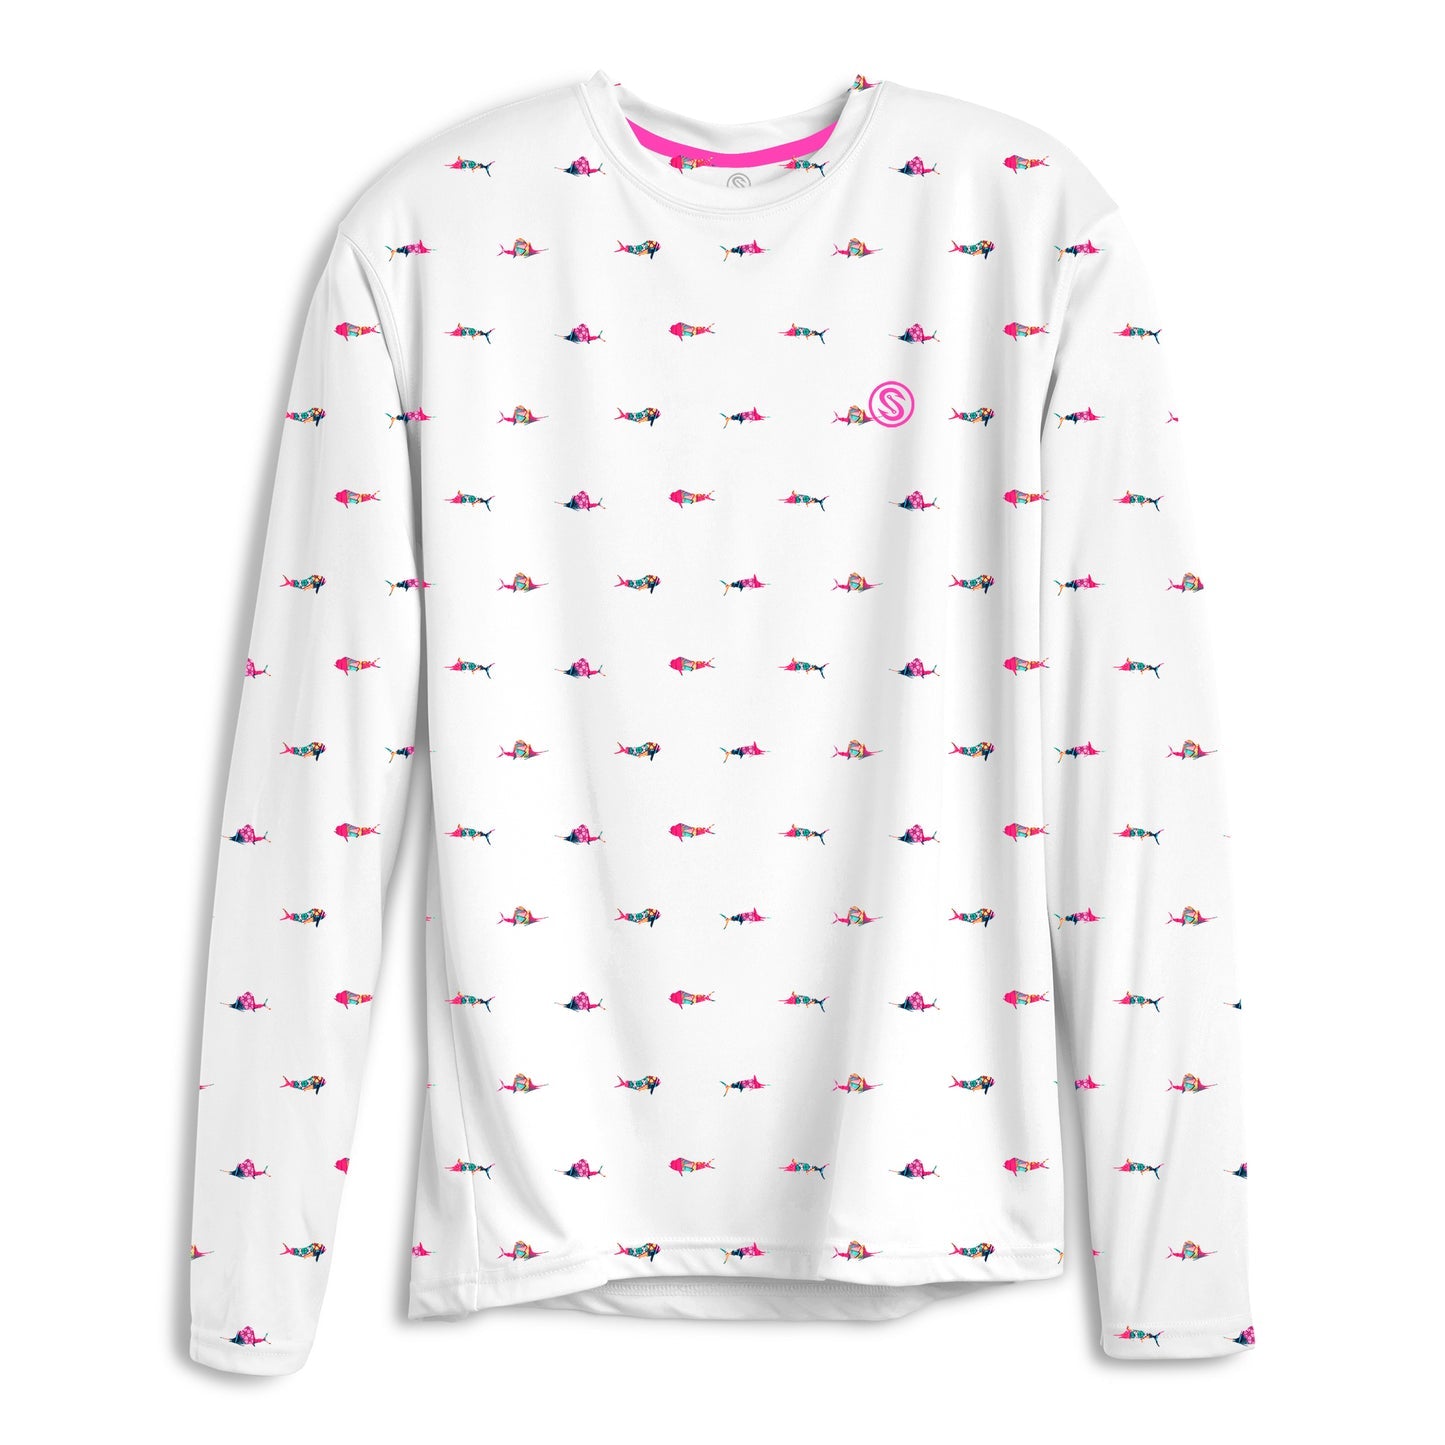 SCALES Trippy Fish Long Sleeve Performance Shirt